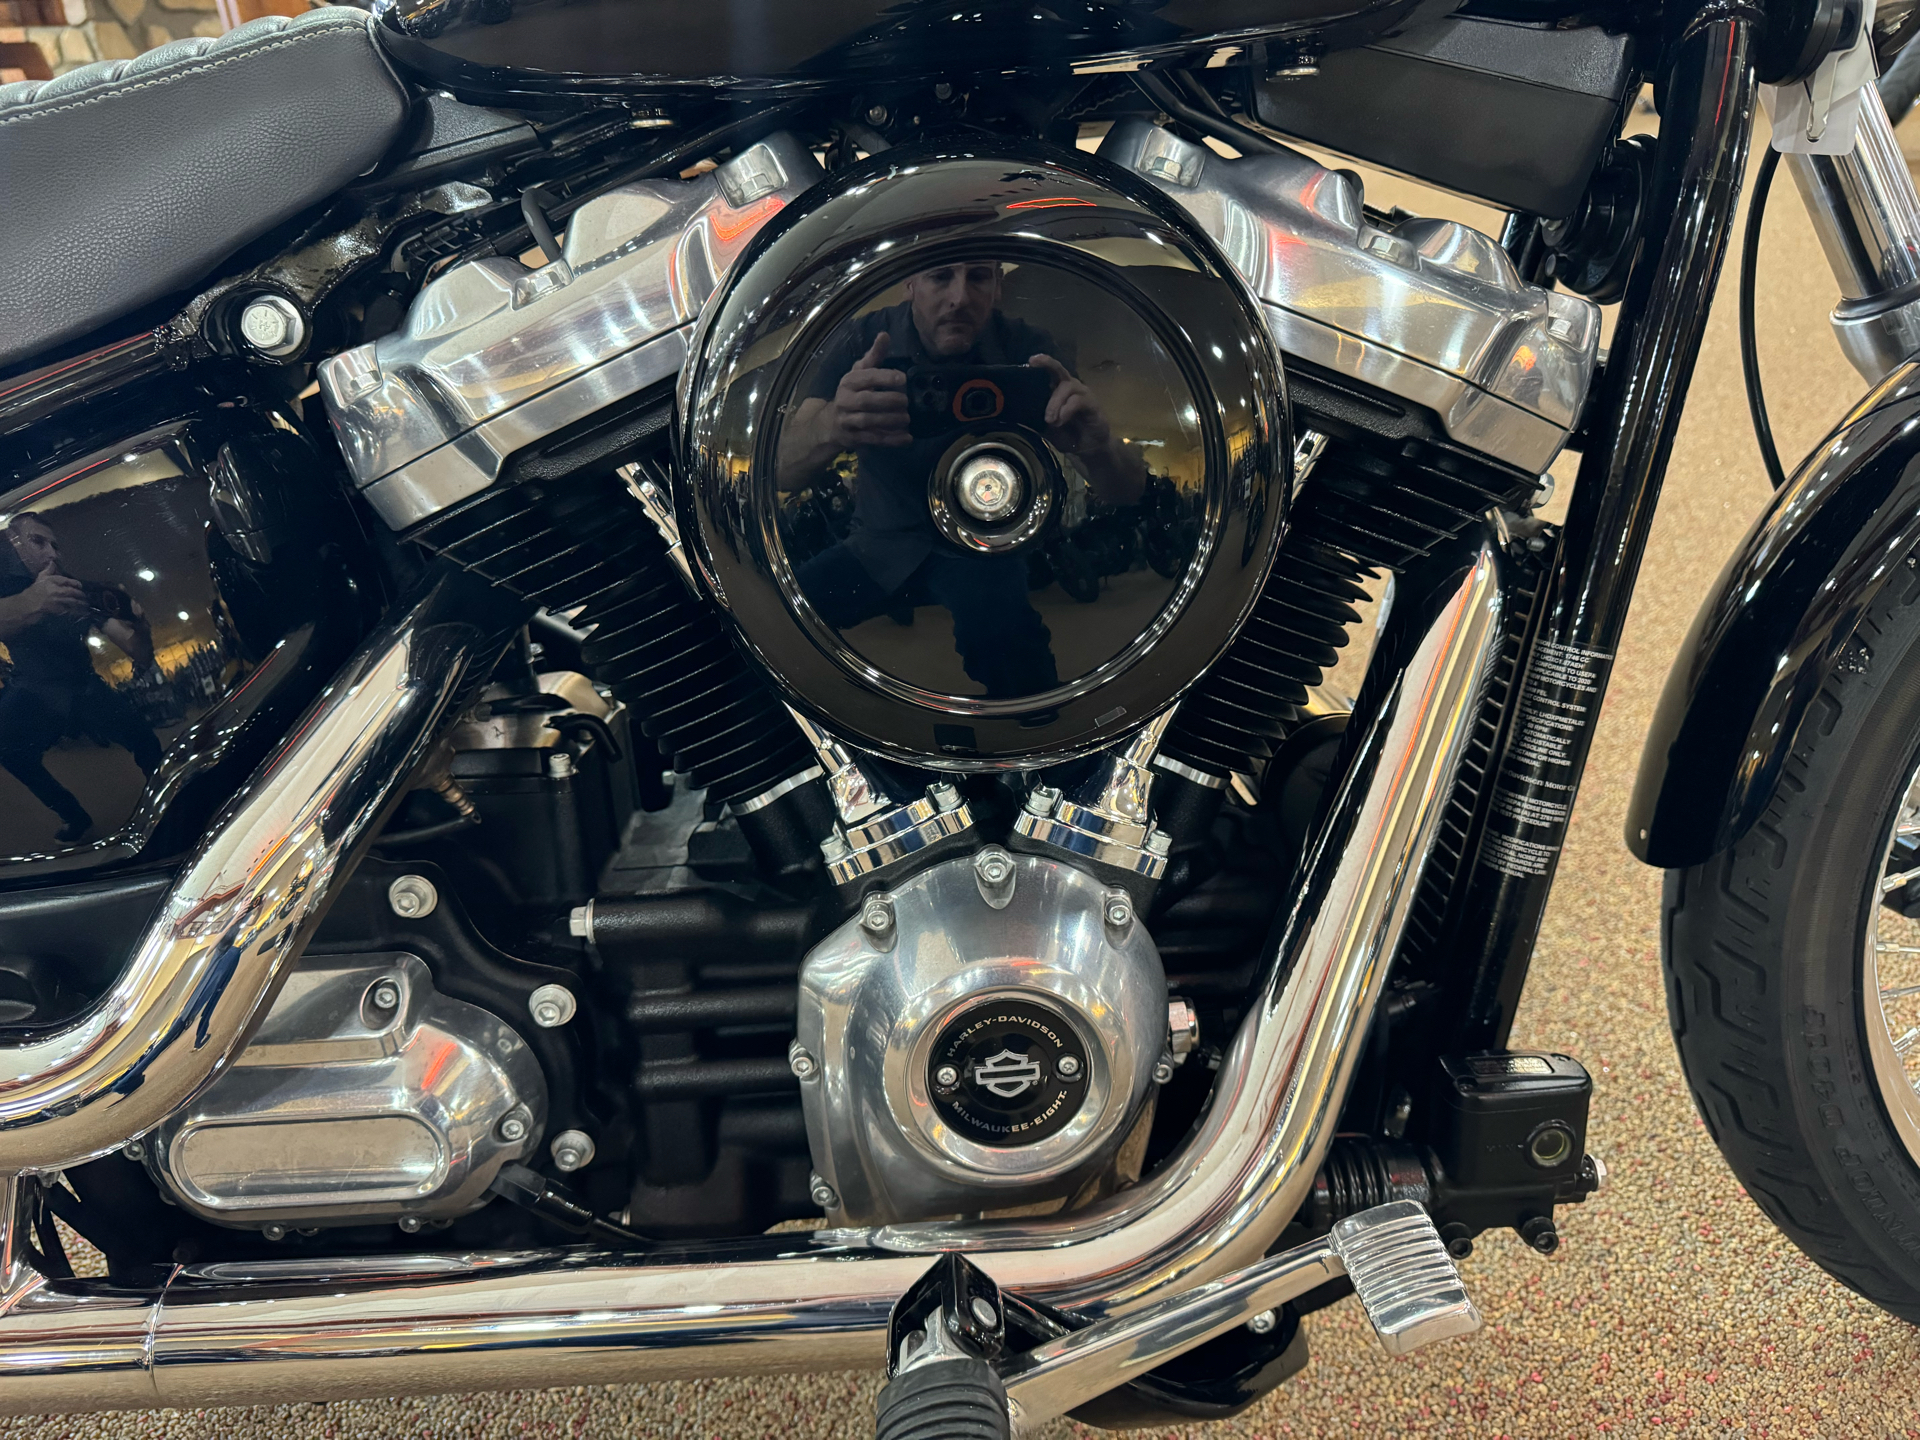 2020 Harley-Davidson Softail® Standard in Knoxville, Tennessee - Photo 7